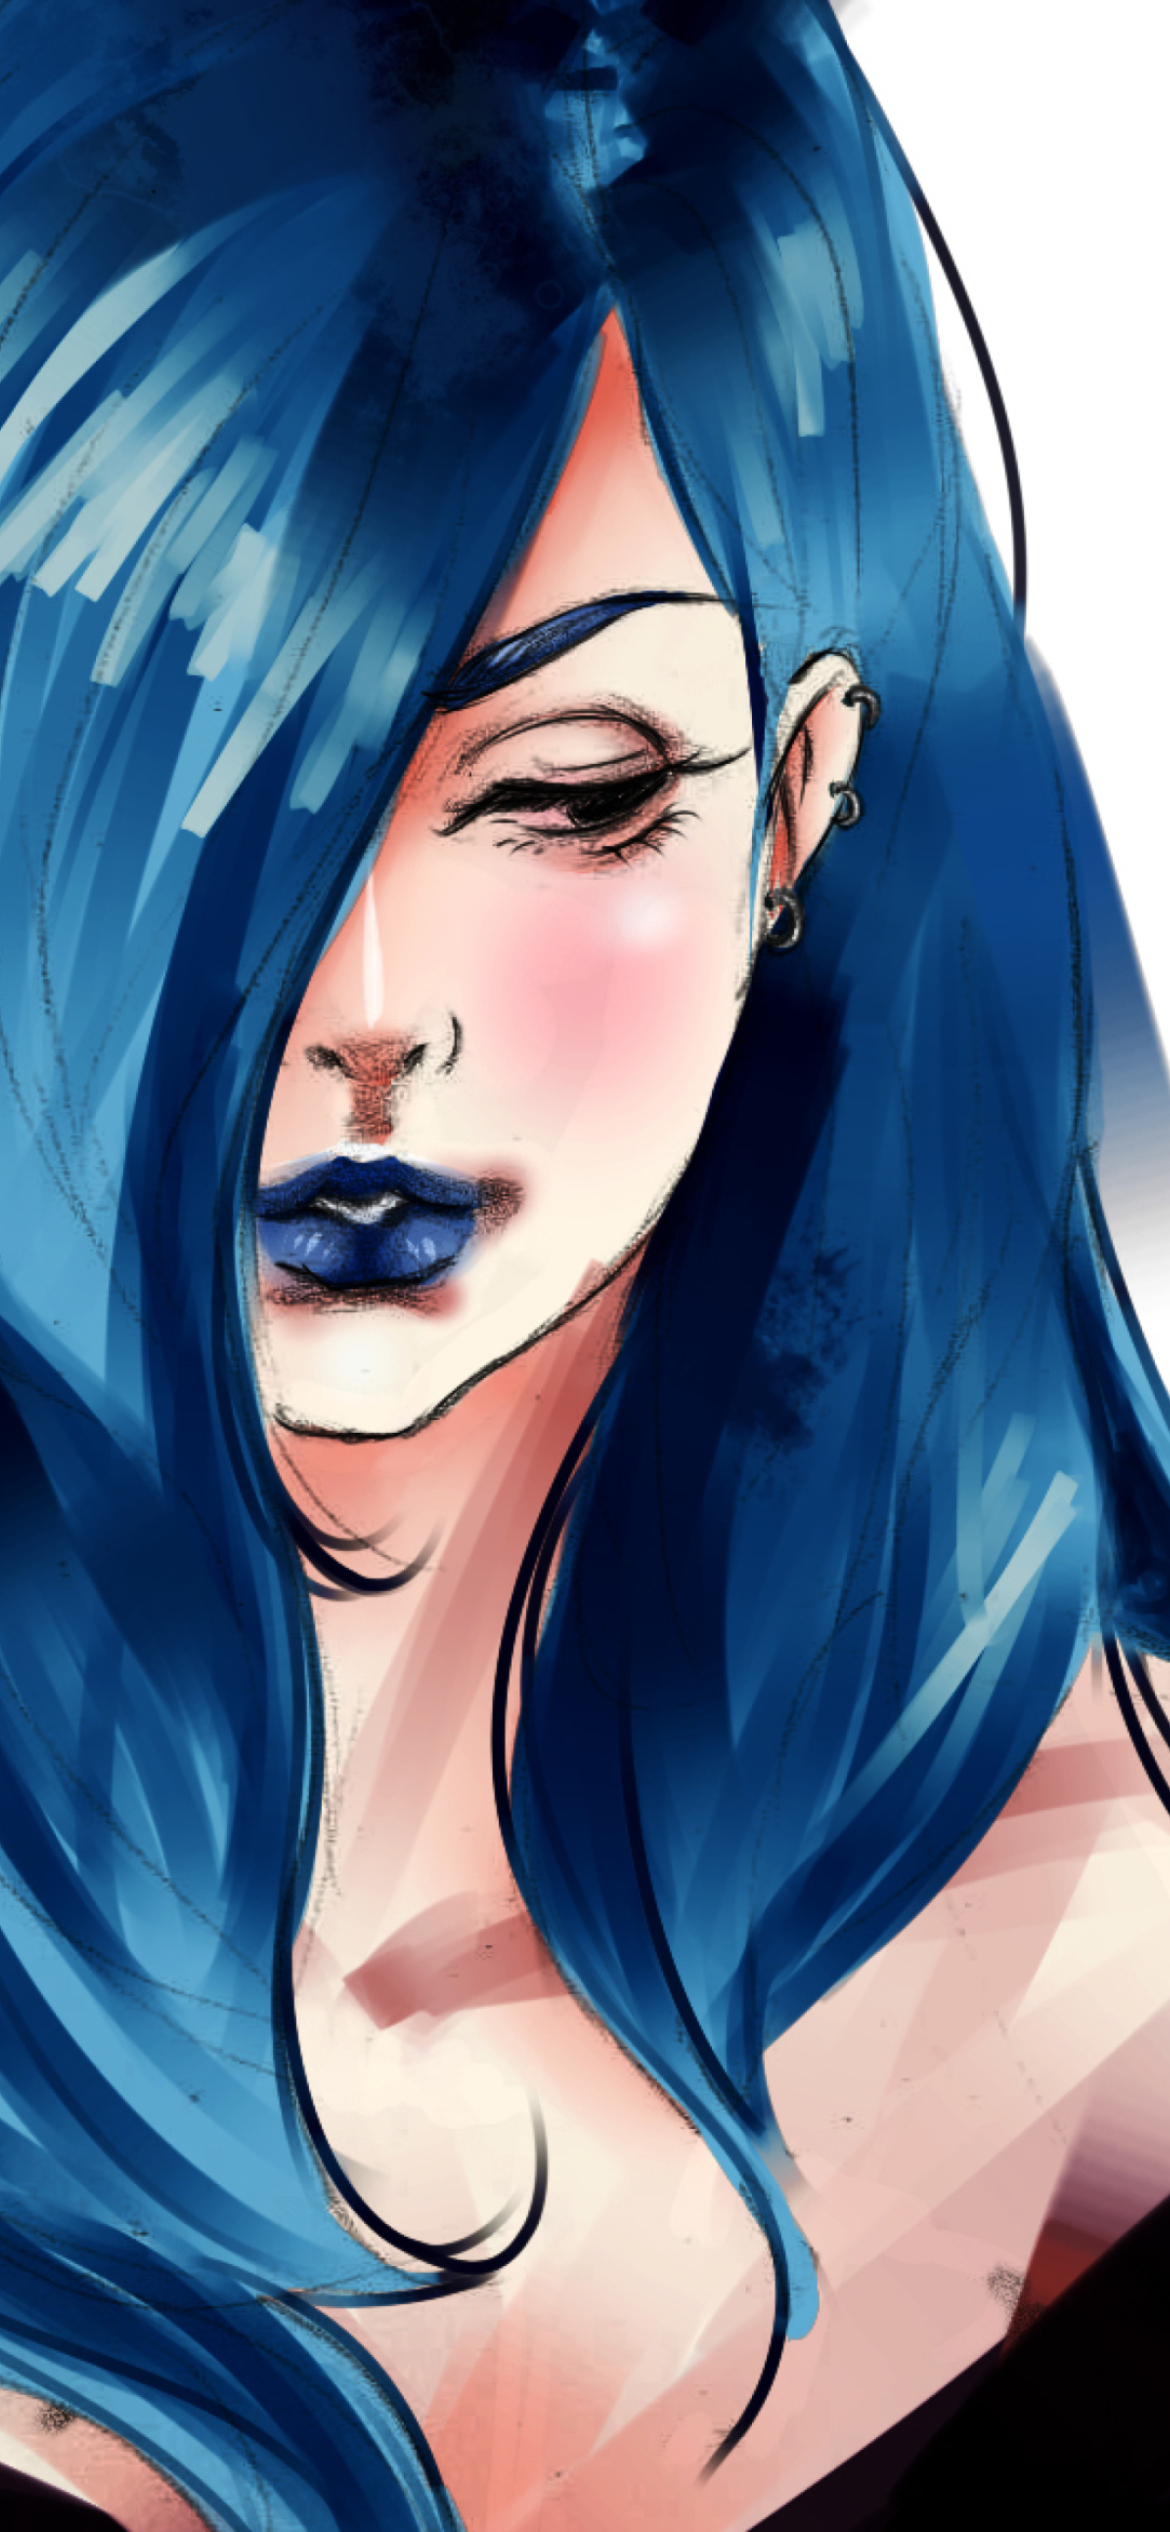 Girl With Blue Hair Painting screenshot #1 1170x2532